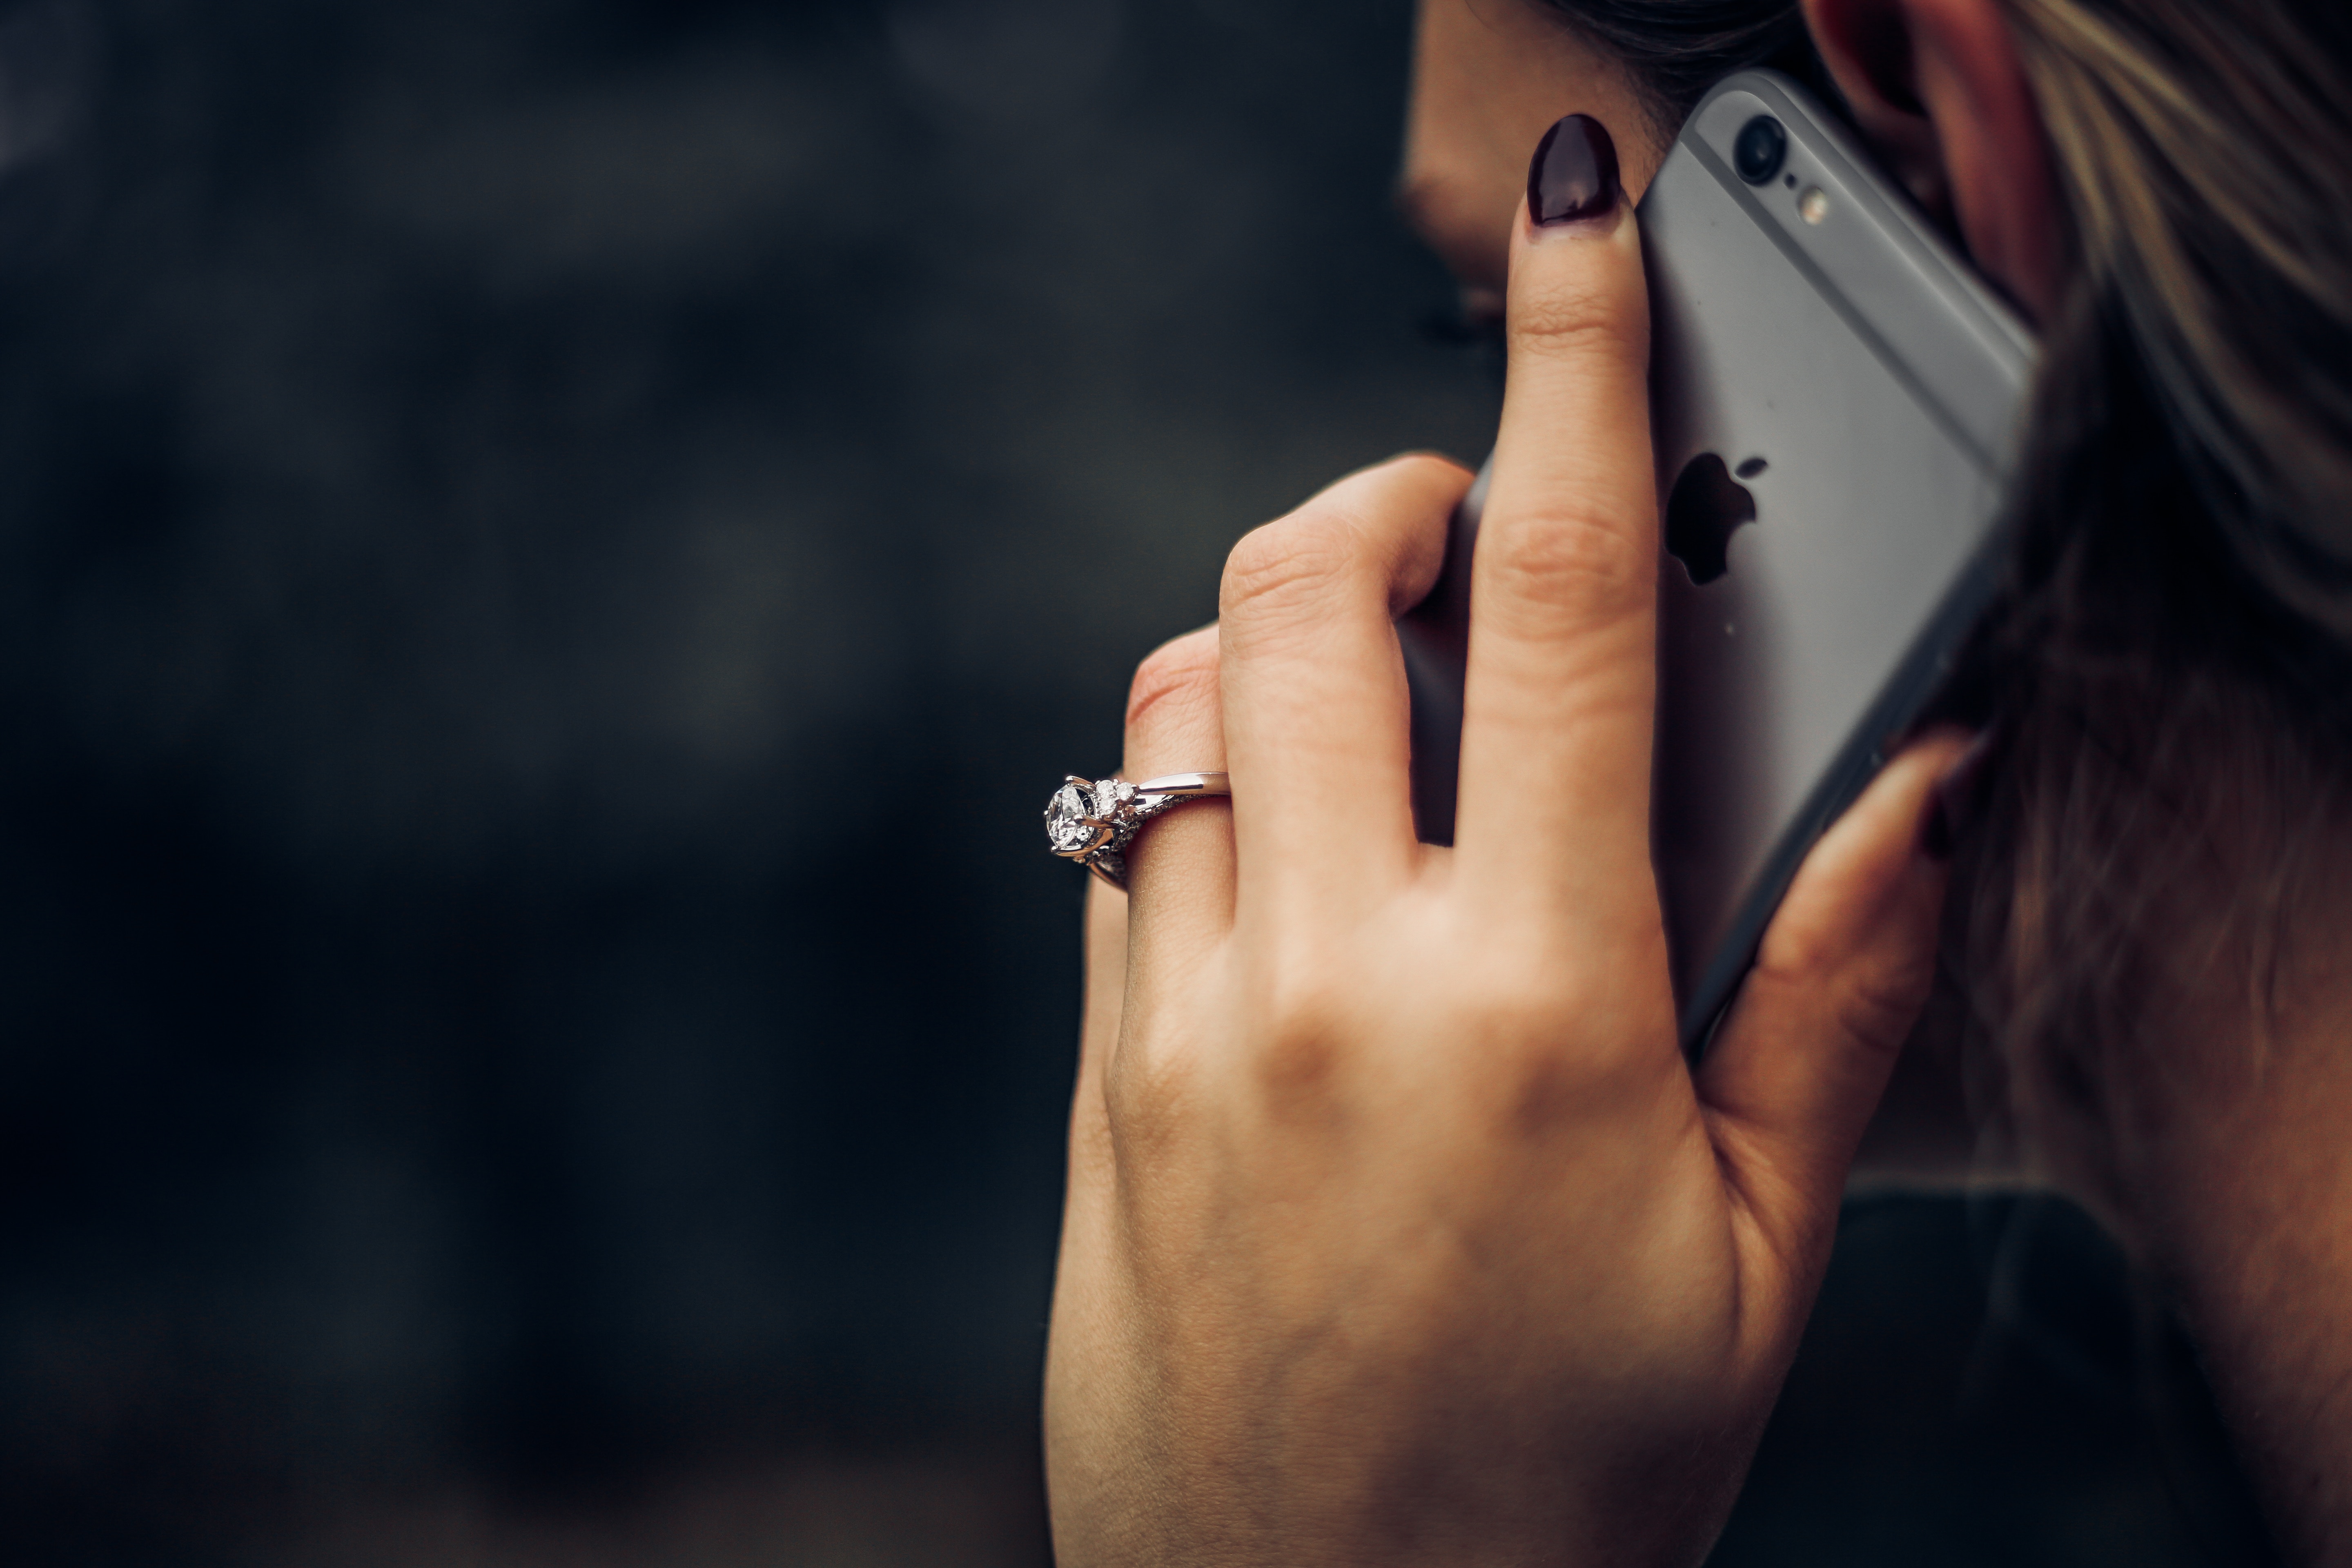 Smartphone-based biomarkers, woman talking on the phone